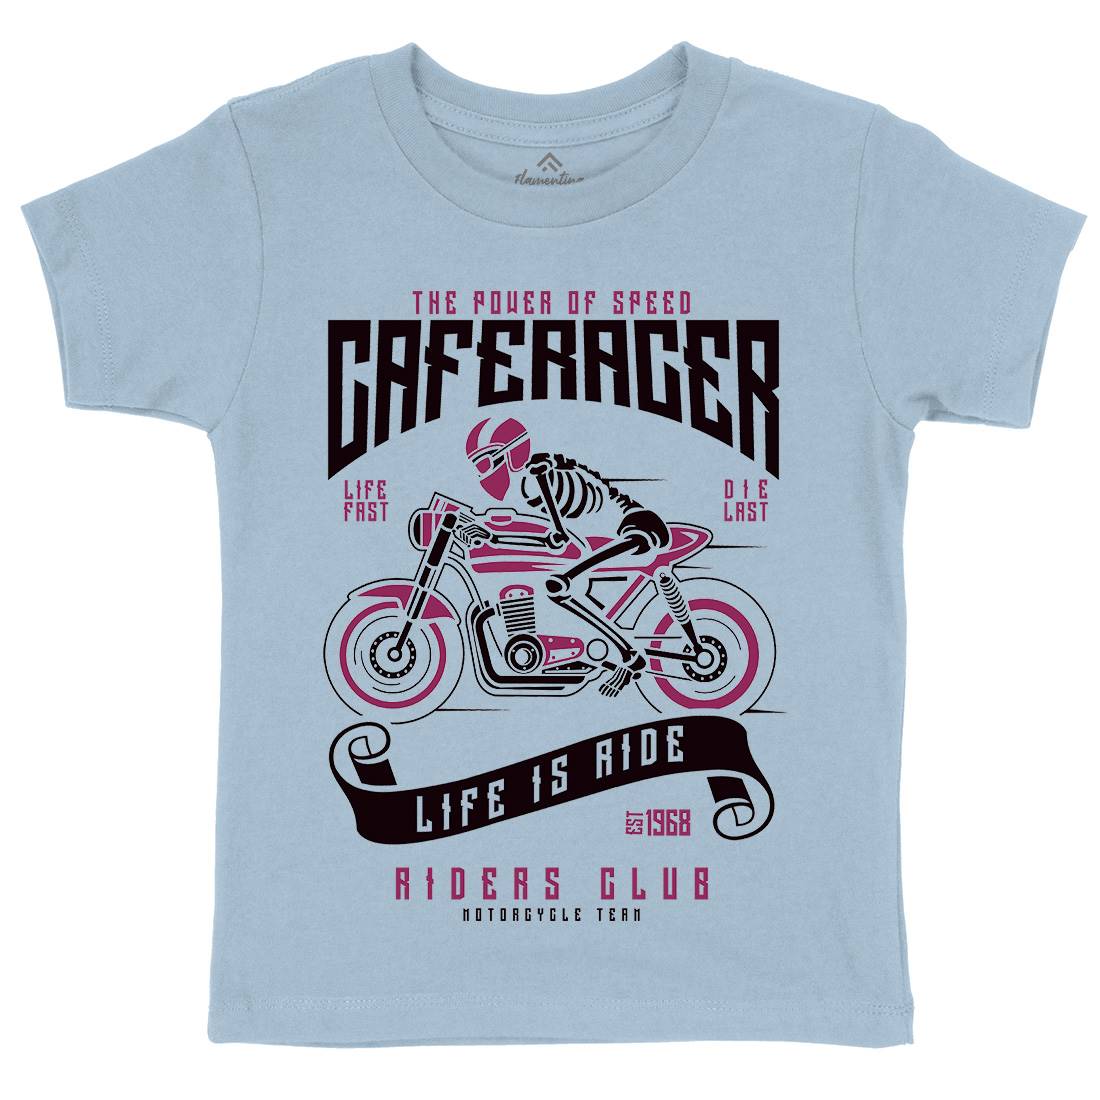 Speed Of Caferacer Kids Organic Crew Neck T-Shirt Motorcycles A154